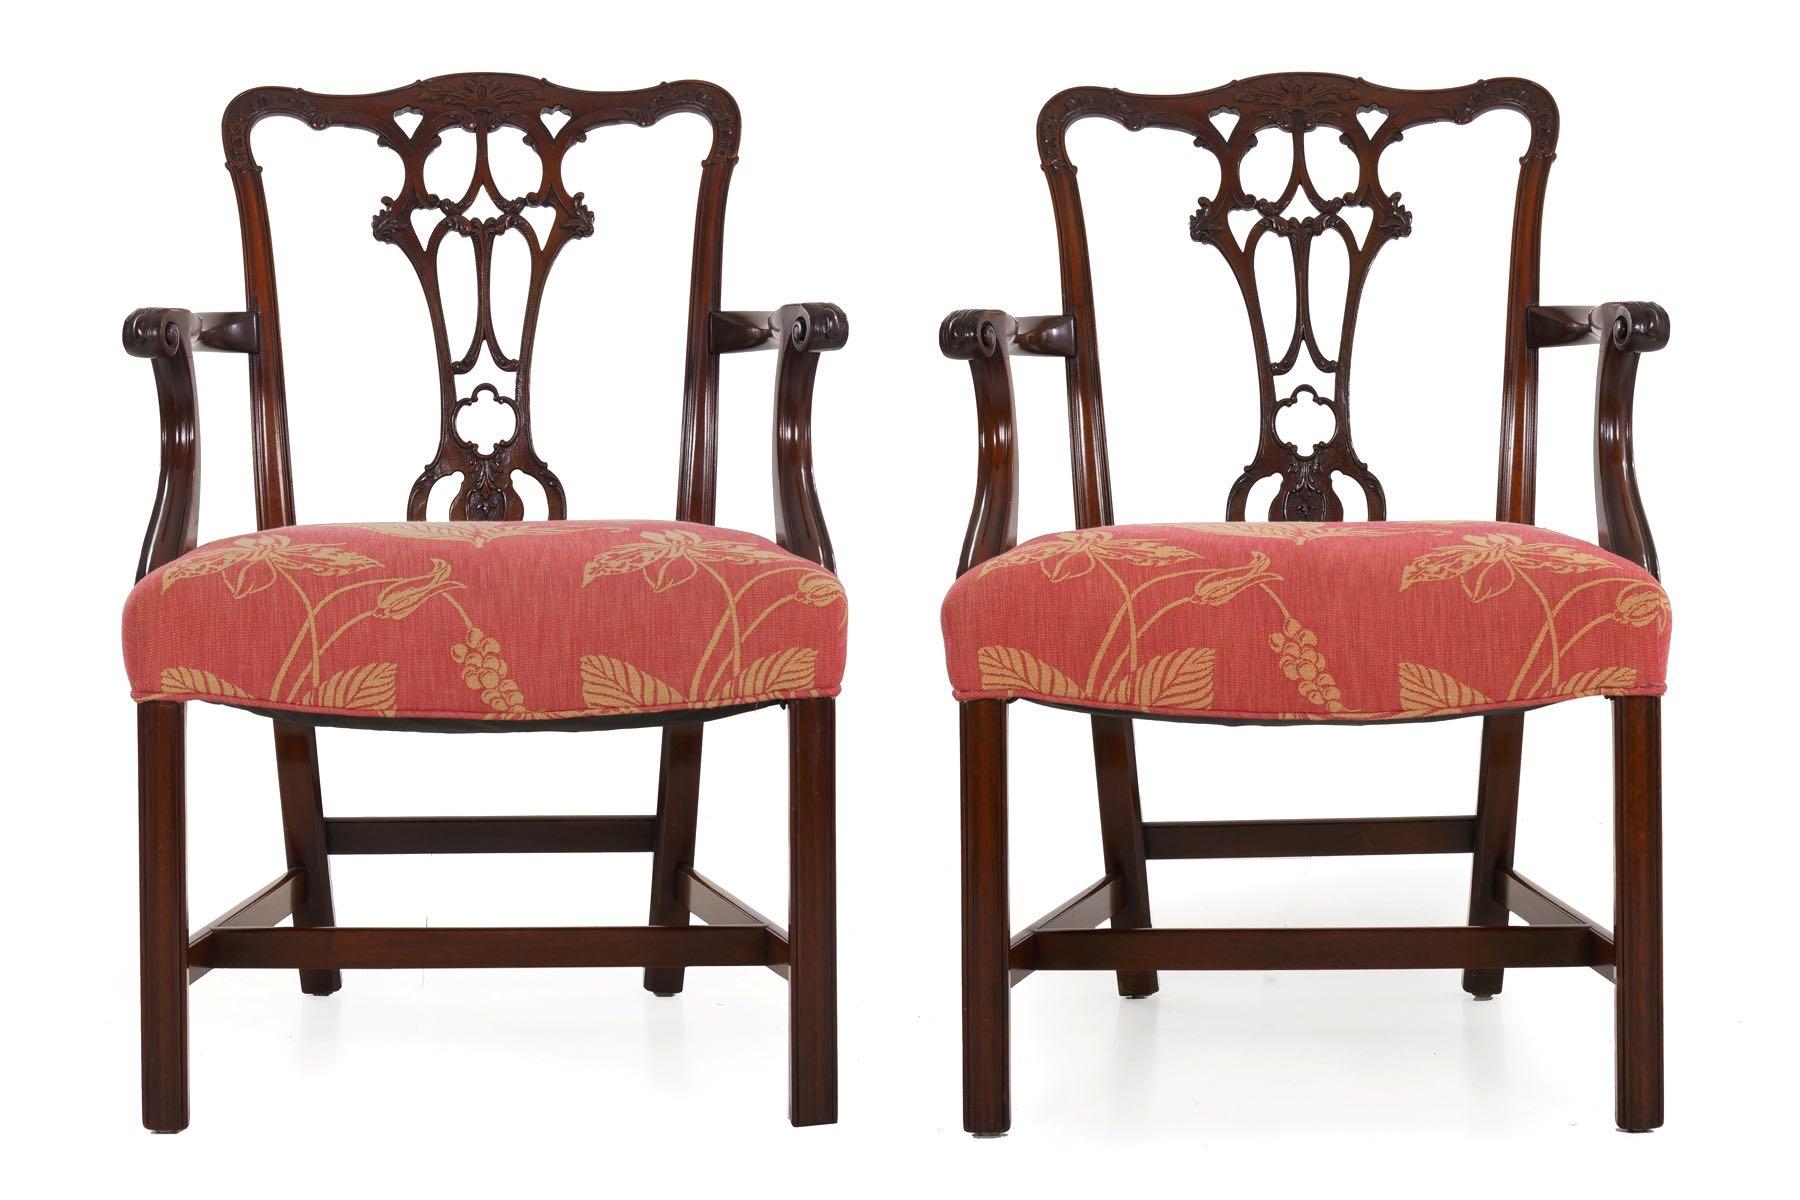 George III style carved mahogany set of six dining chairs
circa first half of the 20th century
Item # 009ZMO18Q 

A very finely carved mahogany set of dining chairs in the George III taste, they feature a robust pierced splat with intricate displays